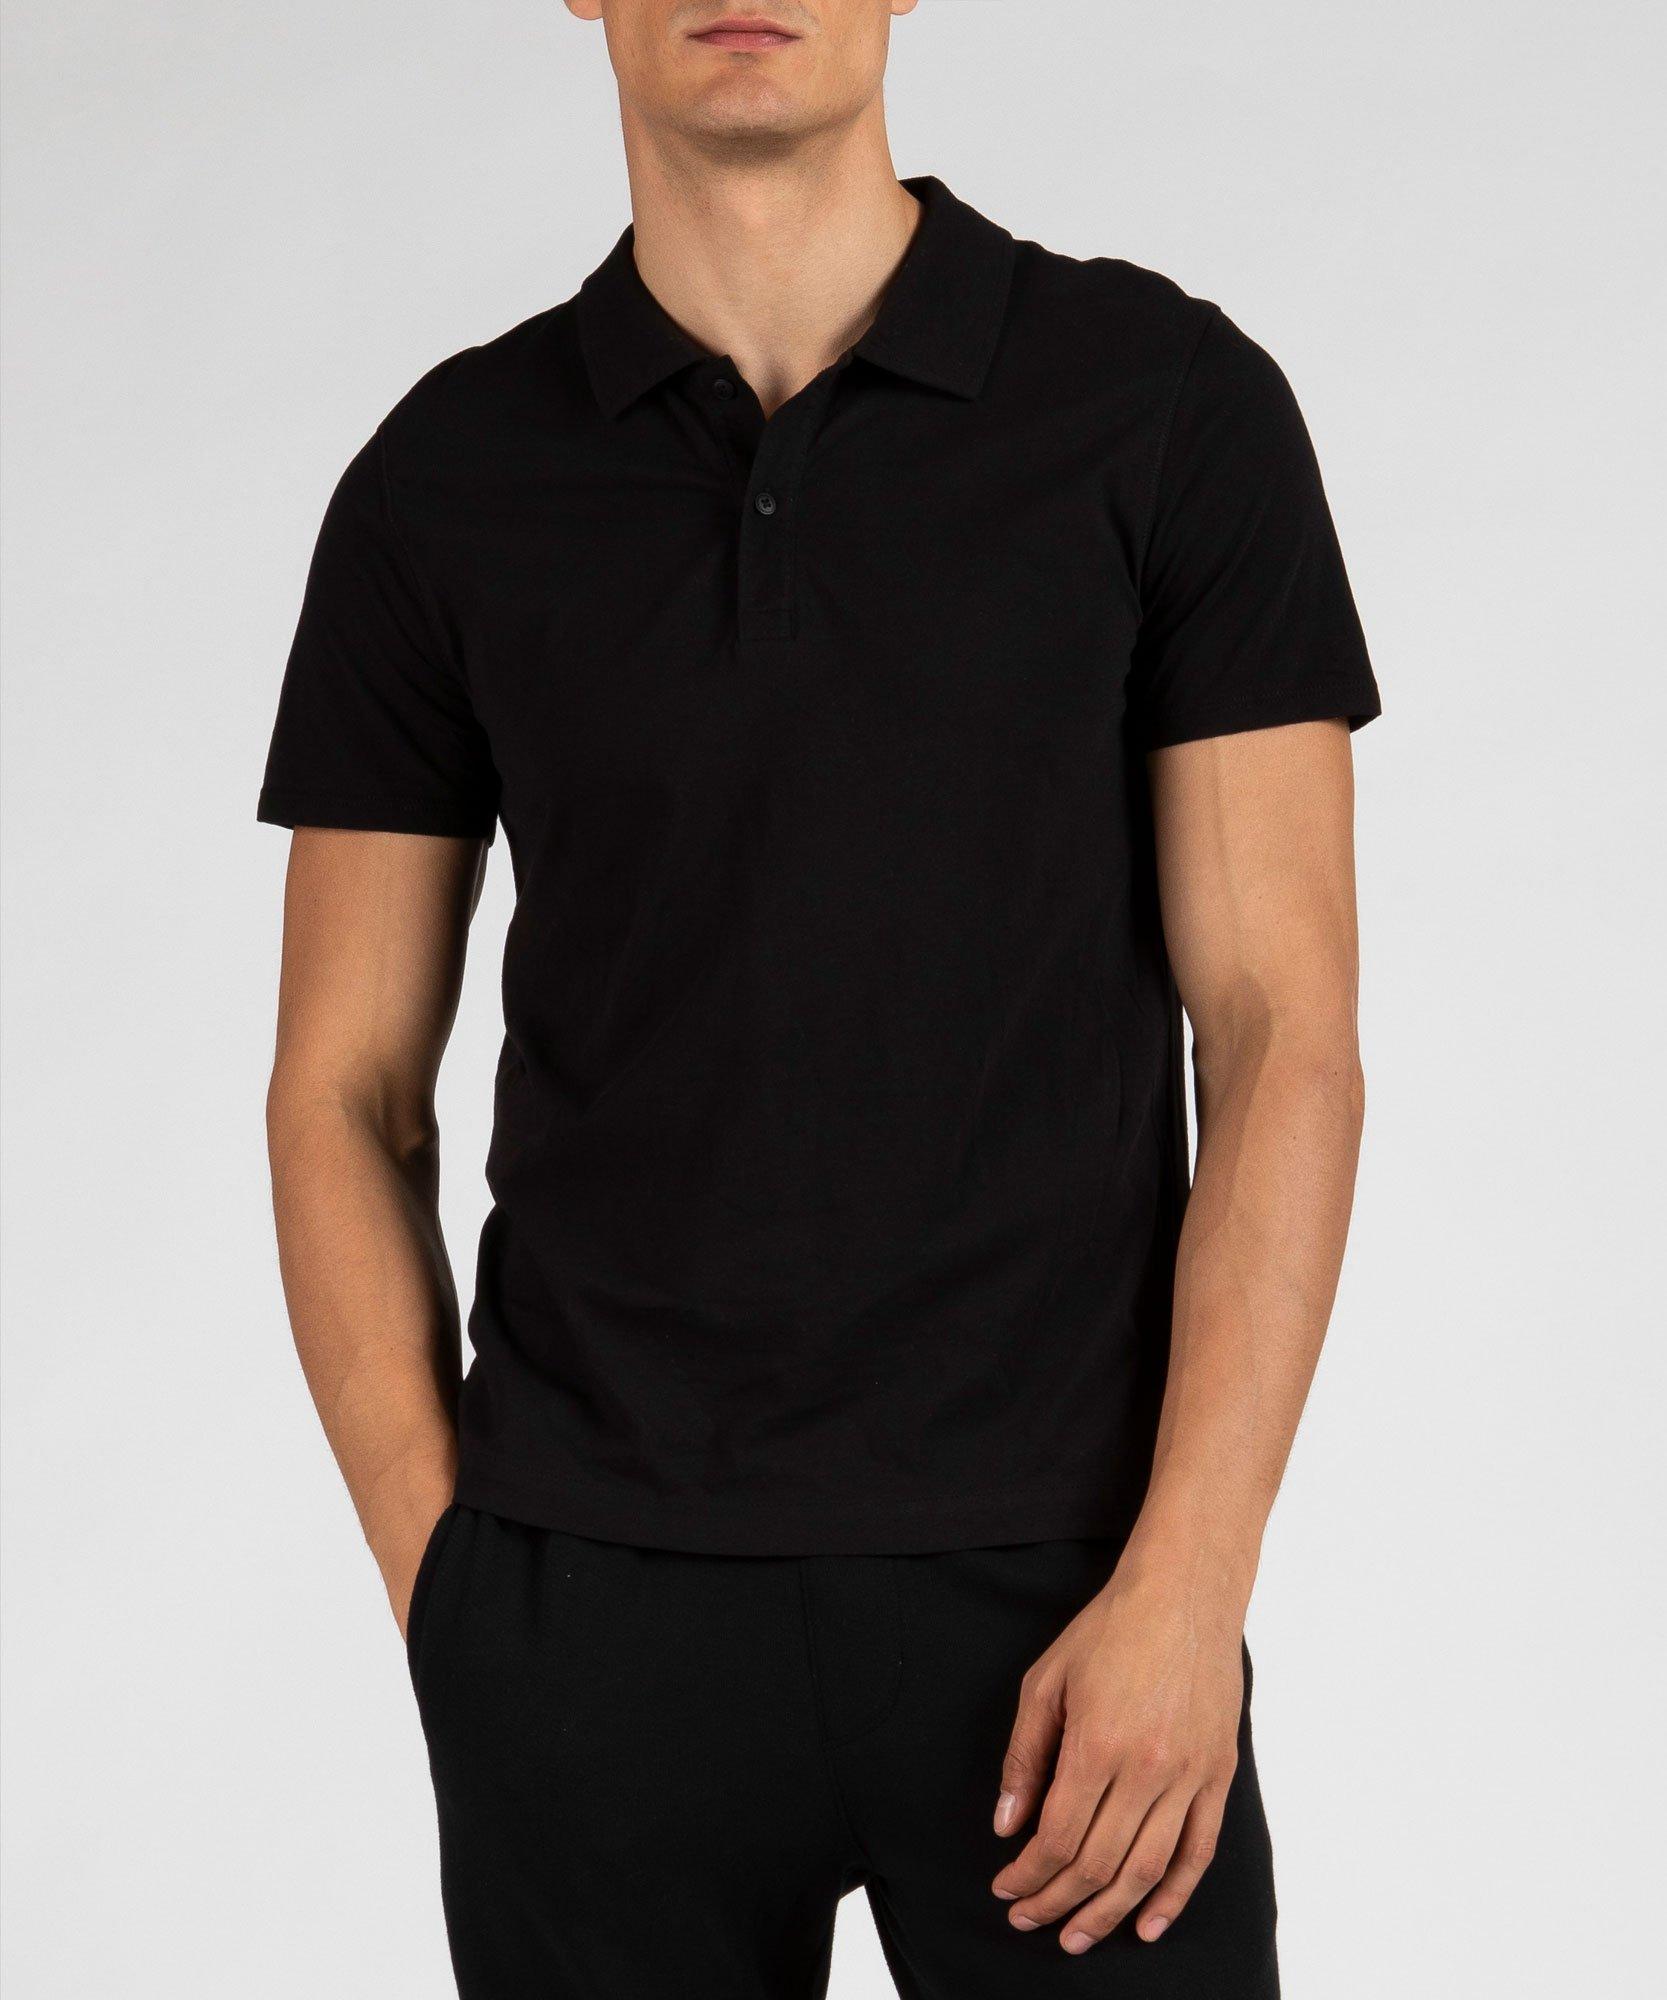 ATM Cotton Classic Jersey Short Sleeve Polo - Black for Men - Lyst